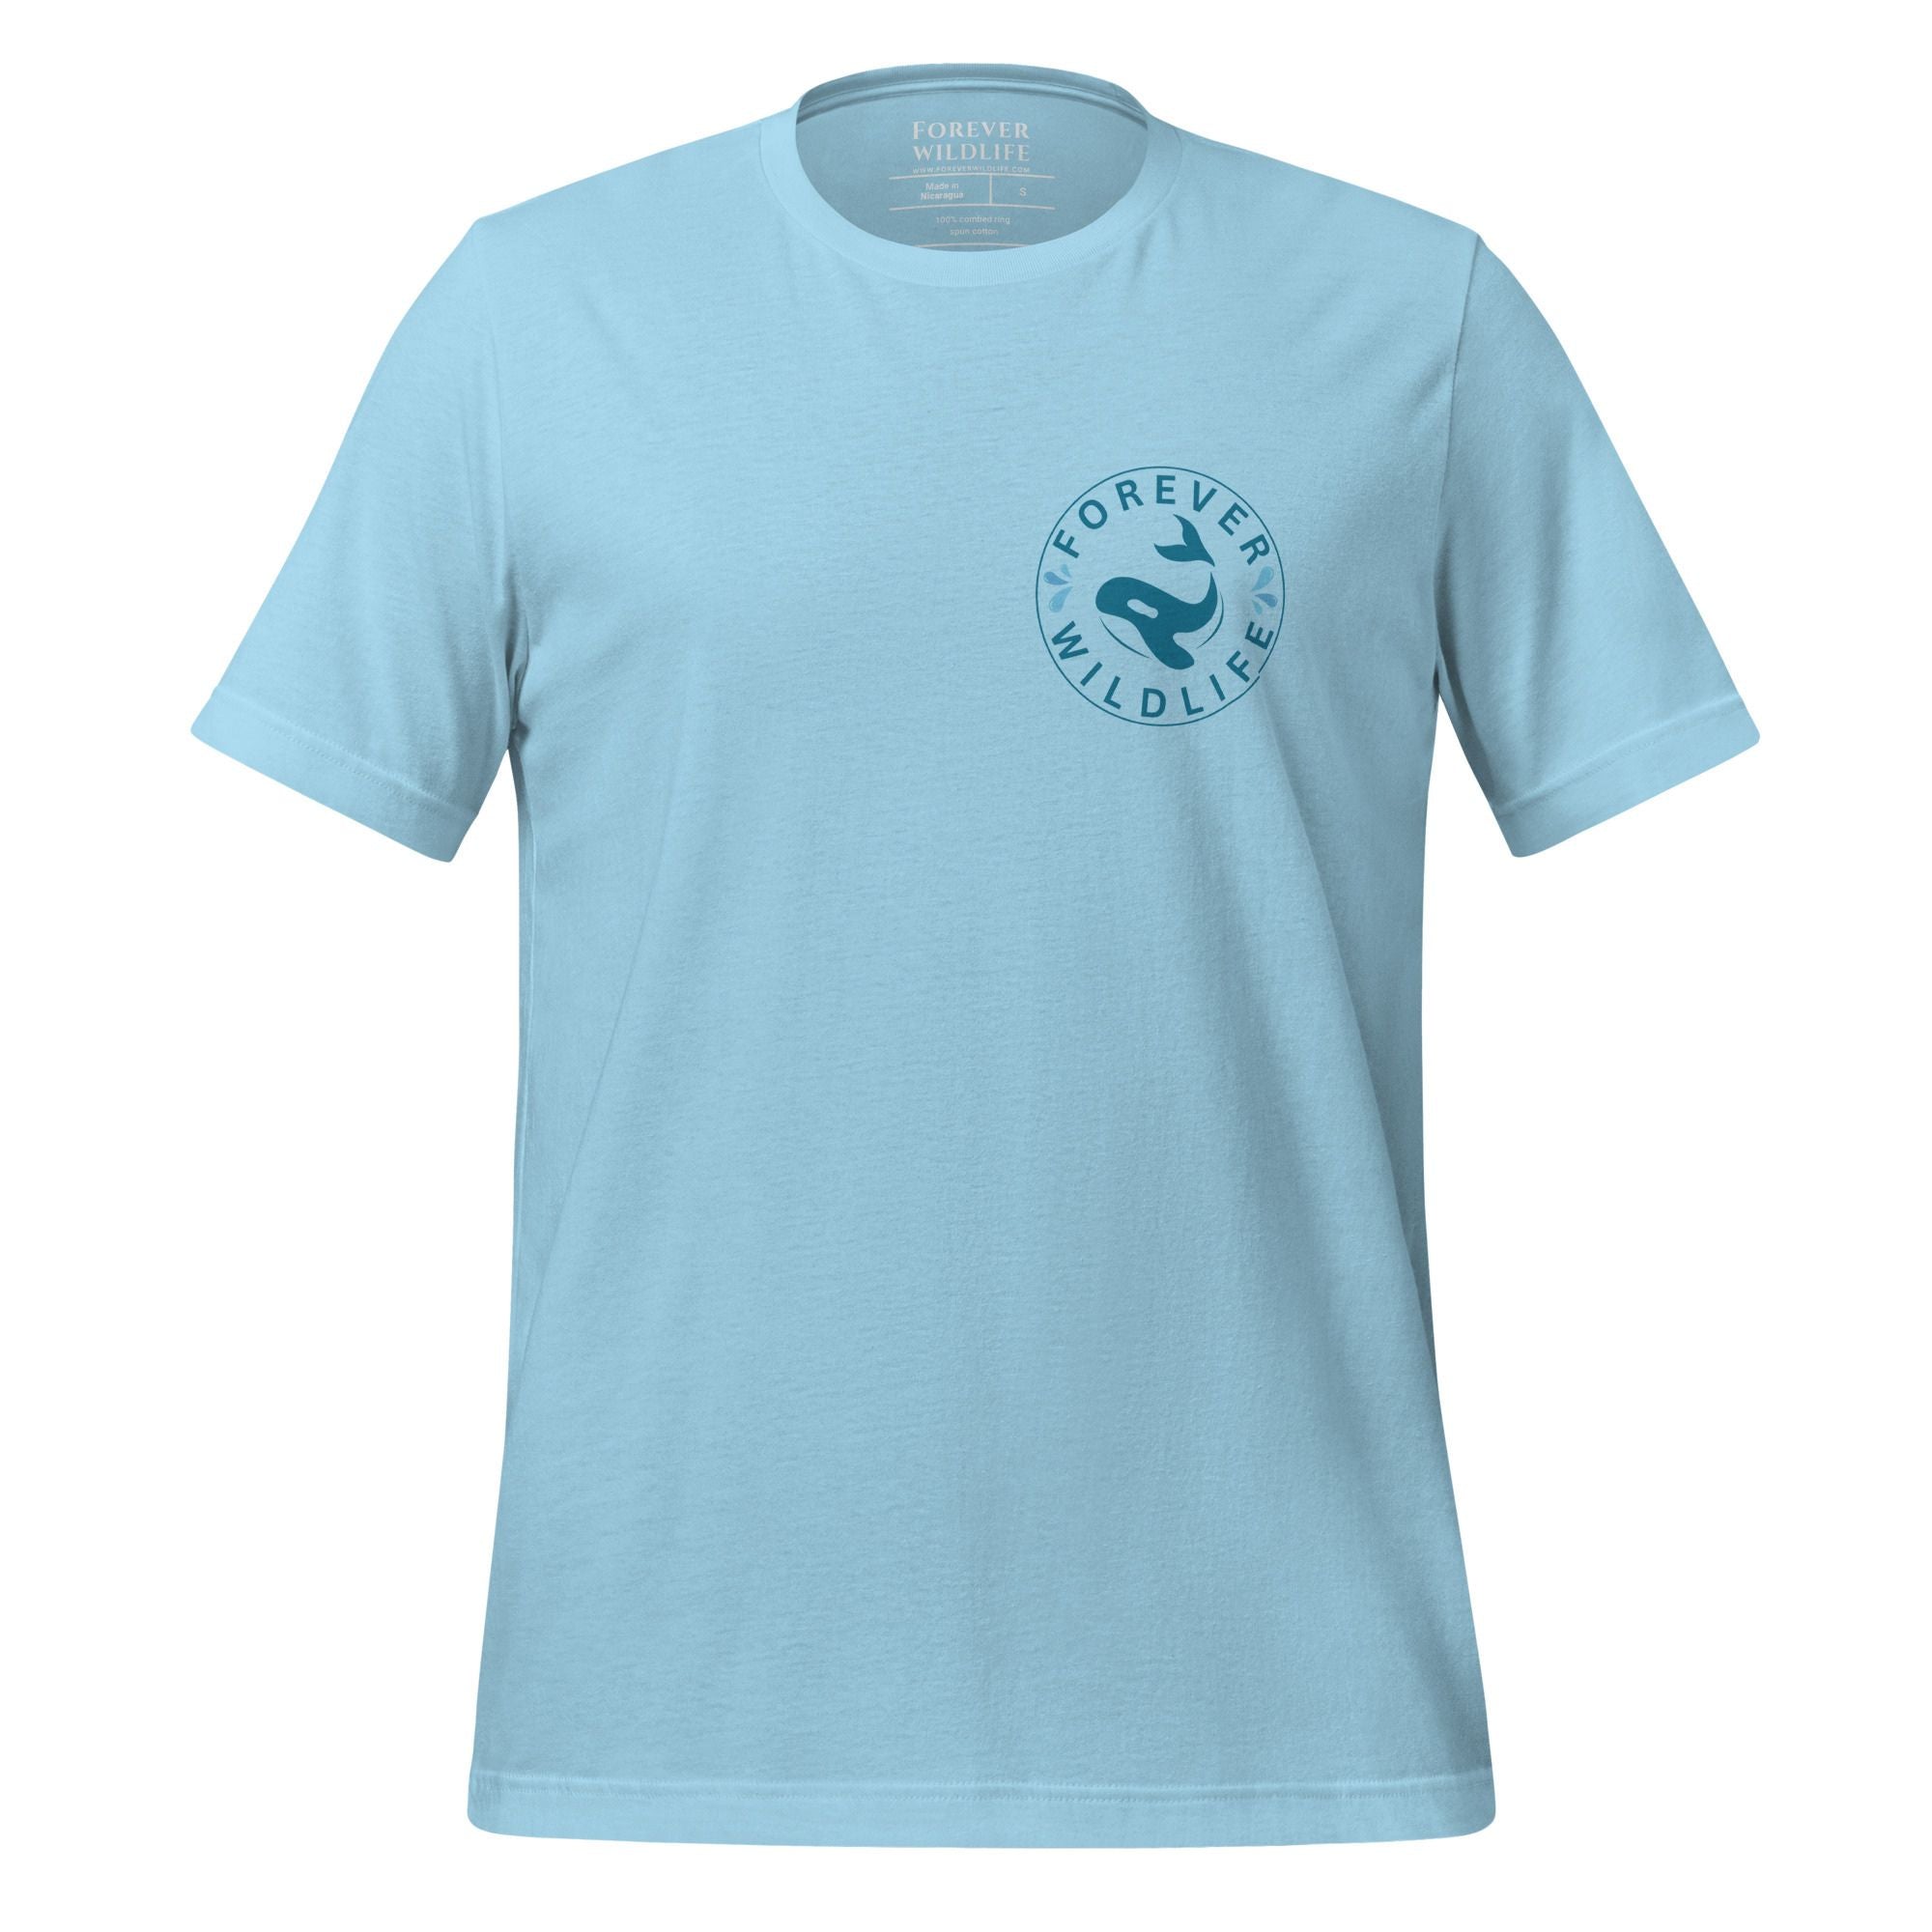 Orca Shirt, beautiful Ocean blue T-Shirt with Killer Whales on the shirt by Forever Wildlife selling Wildlife T Shirts.